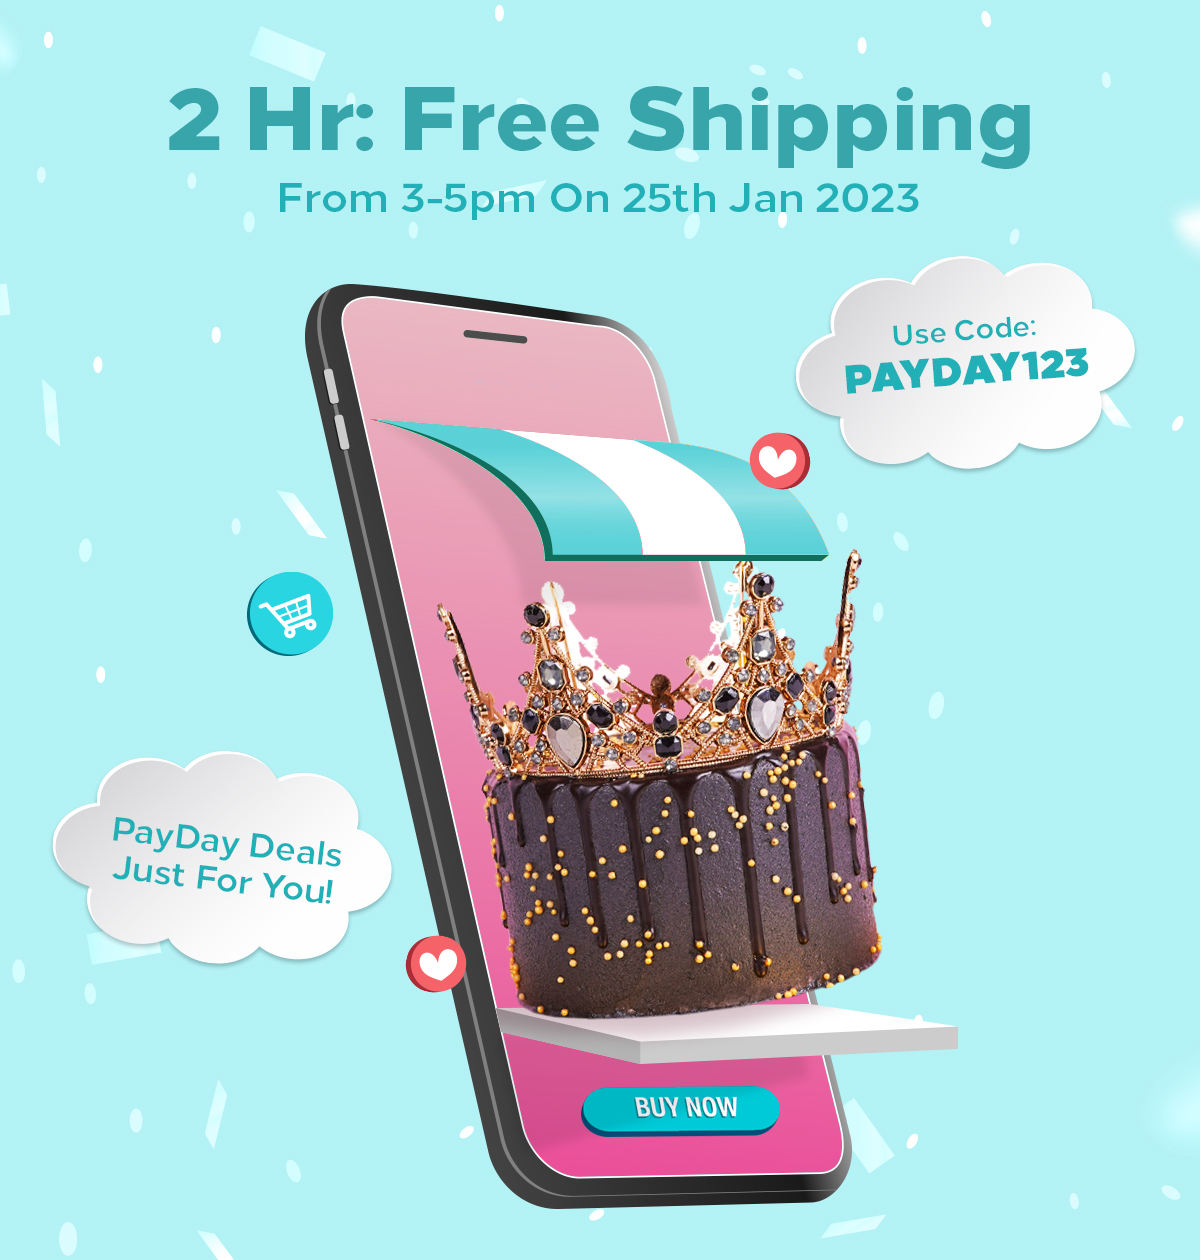 2 Hr: Free Shipping From 3-5pm On 25th Jan 2023 Use Code: pAYDAY123 PayDay Deals JUSt Fo, YOU! BUY NOW 